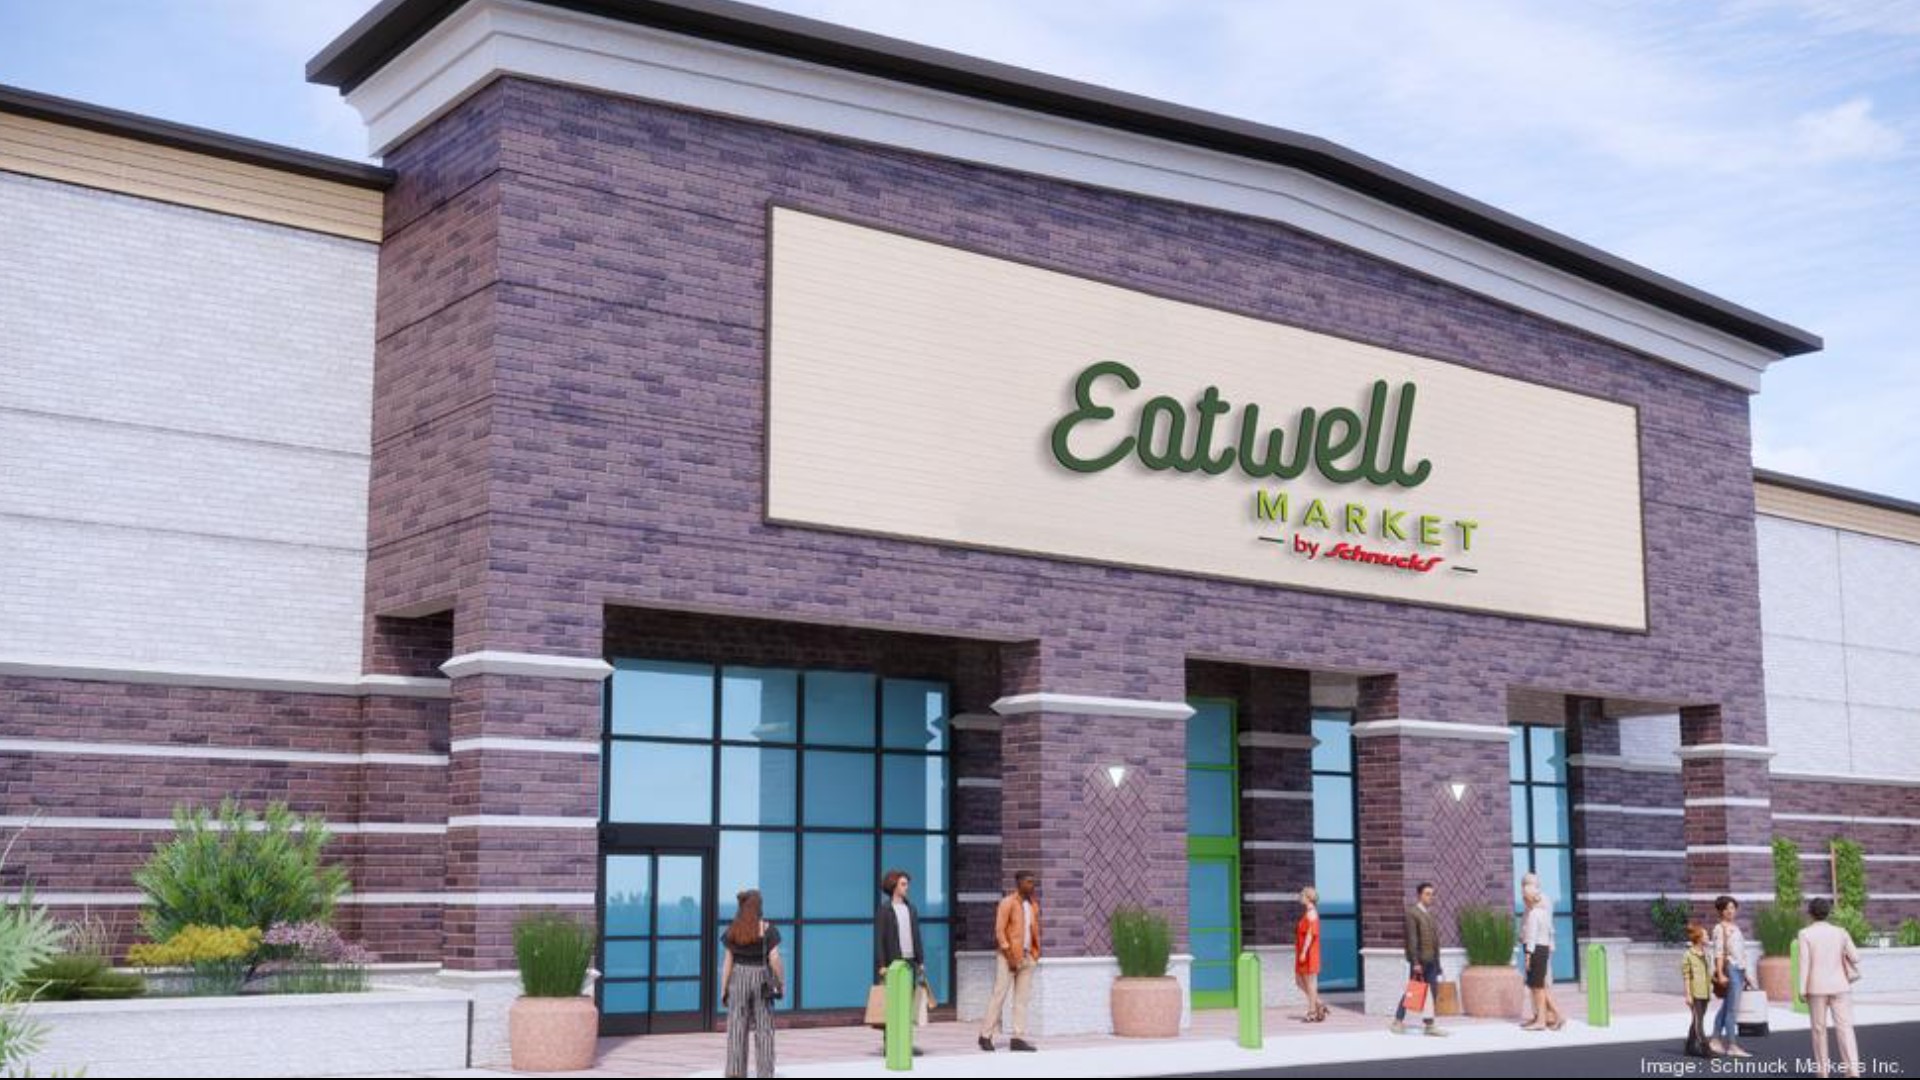 Located at 220 THF Blvd. in Chesterfield, Eatwell Market will offer local products and emphasize natural and organic foods. It's set to open March 29.